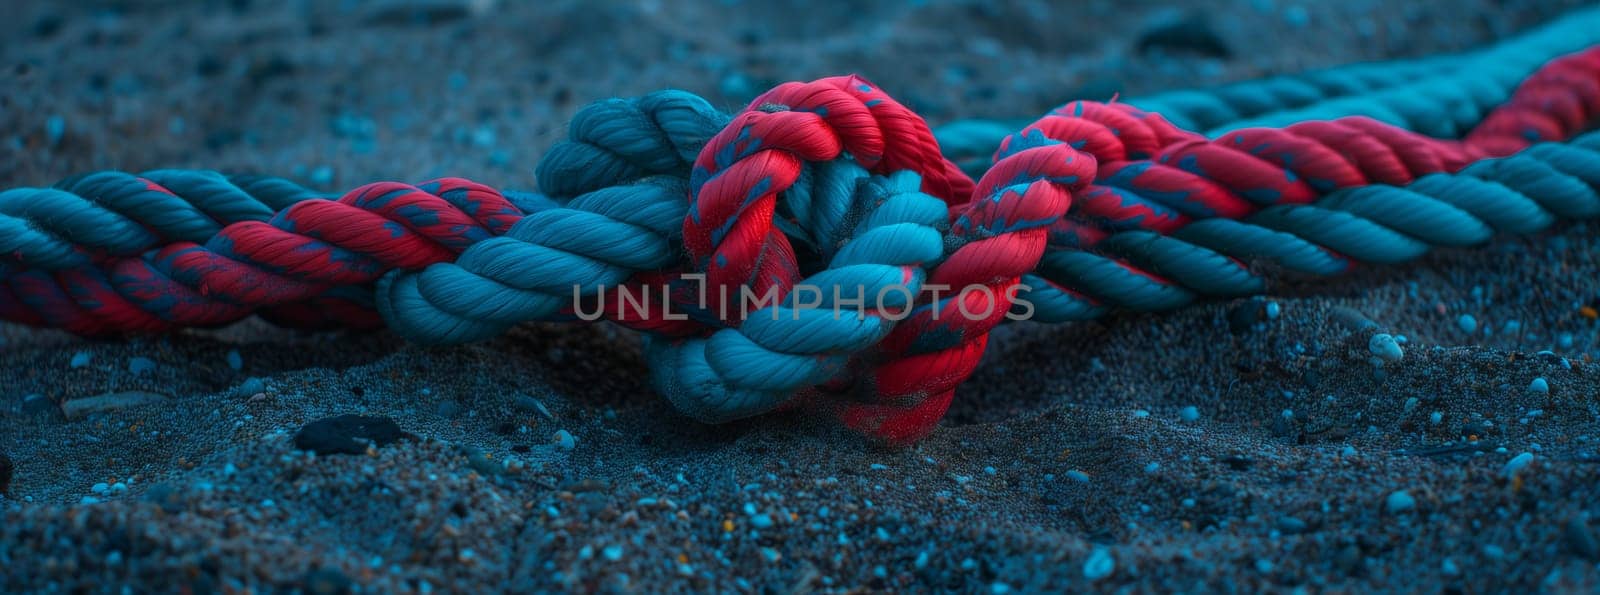 Aqua and electric blue ropes creatively knotted on the ground. A lovely arts and crafts project combining colors and patterns in jewelry making